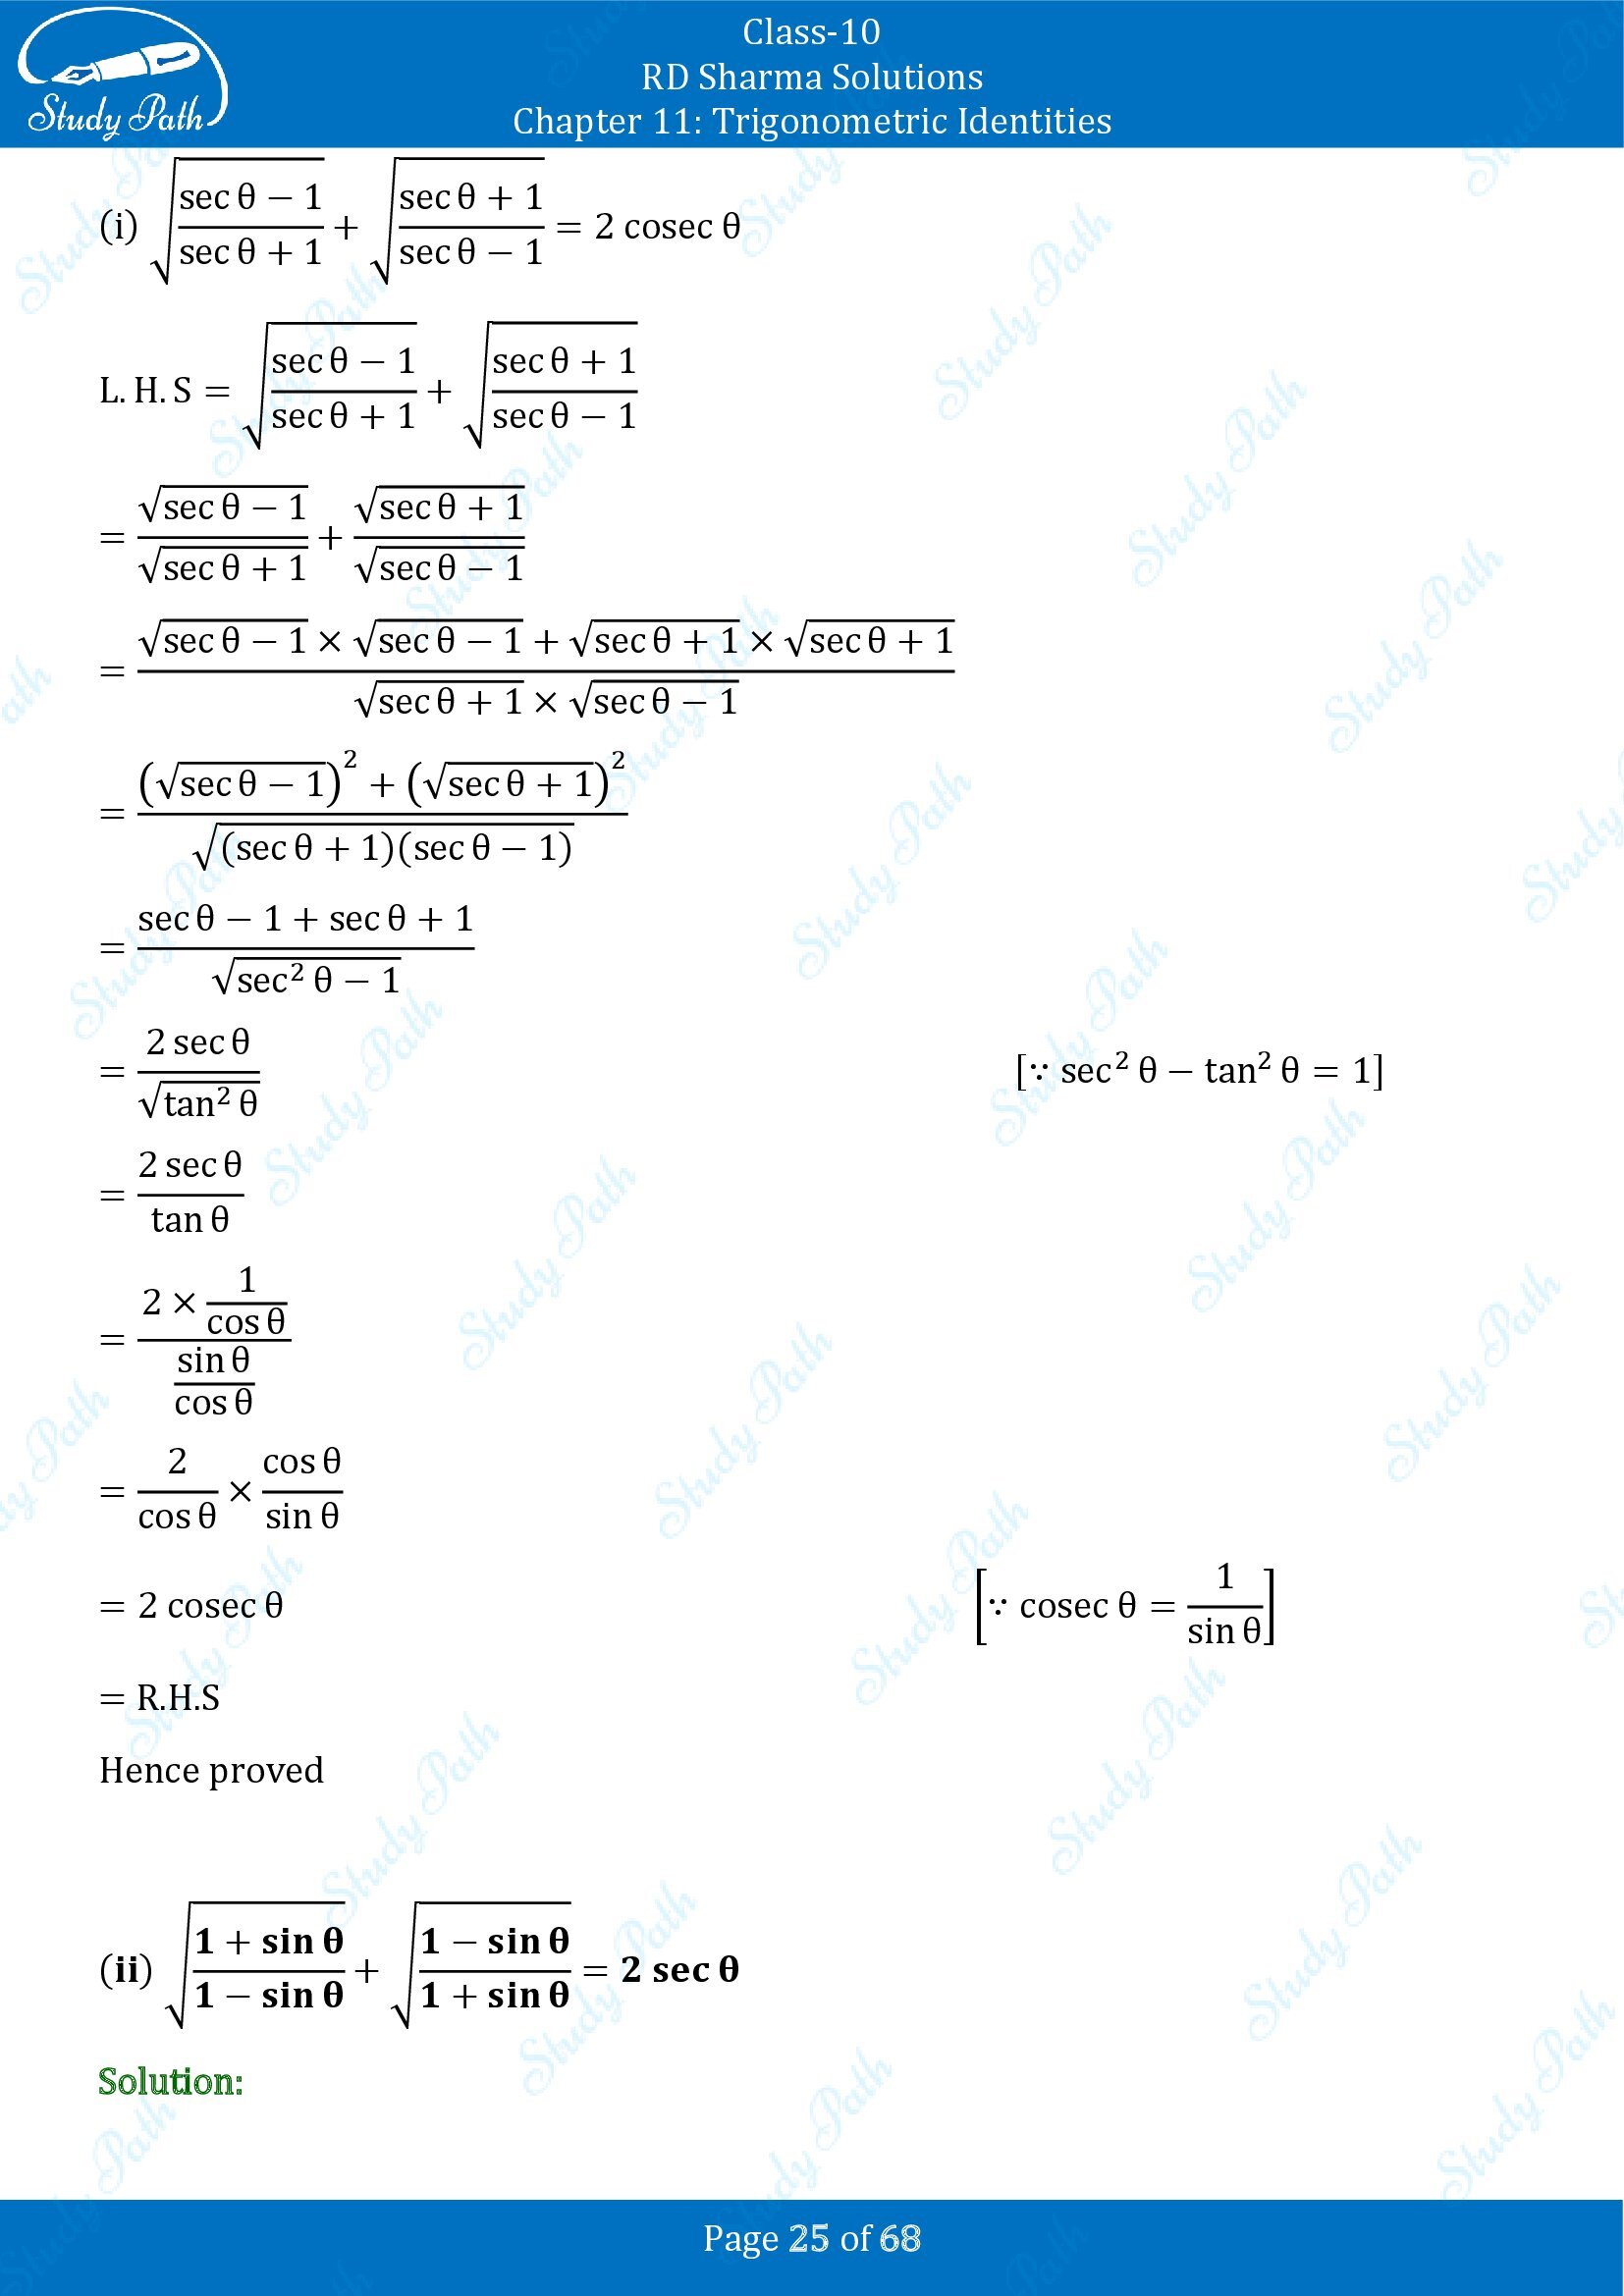 RD Sharma Solutions Class 10 Chapter 11 Trigonometric Identities Exercise 11.1 00025